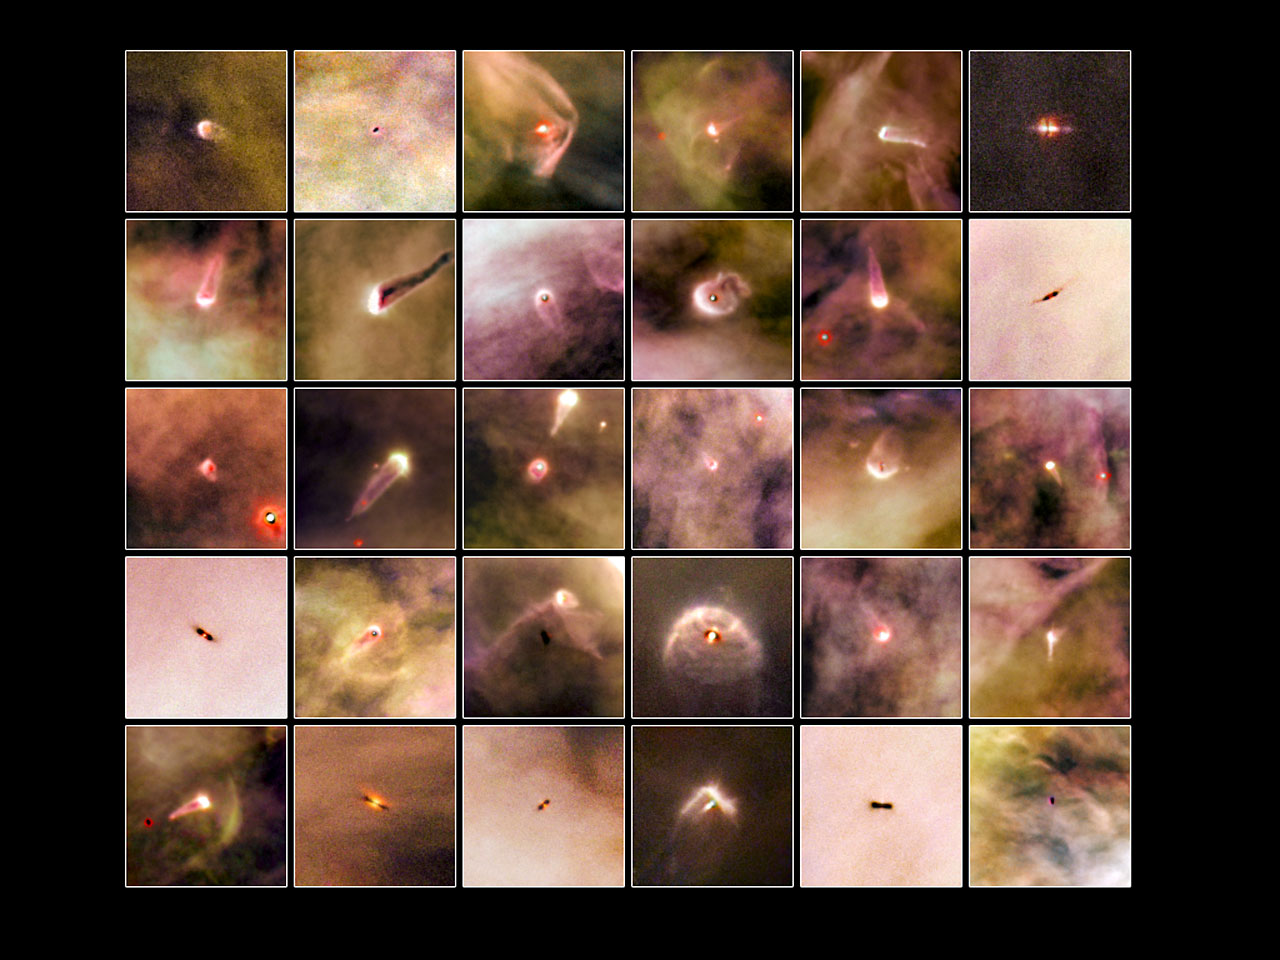 A Photographic Atlas of Planetary Nurseries in the Orion Nebula. These Hubble Space Telescope images show embedded circumstellar disks orbiting very young stars. Each is seen from a different angle. Some are energized to glow brightly by the light of a nearby star, while others are dark and seen in silhouette against the bright glowing gas of the Orion nebula.